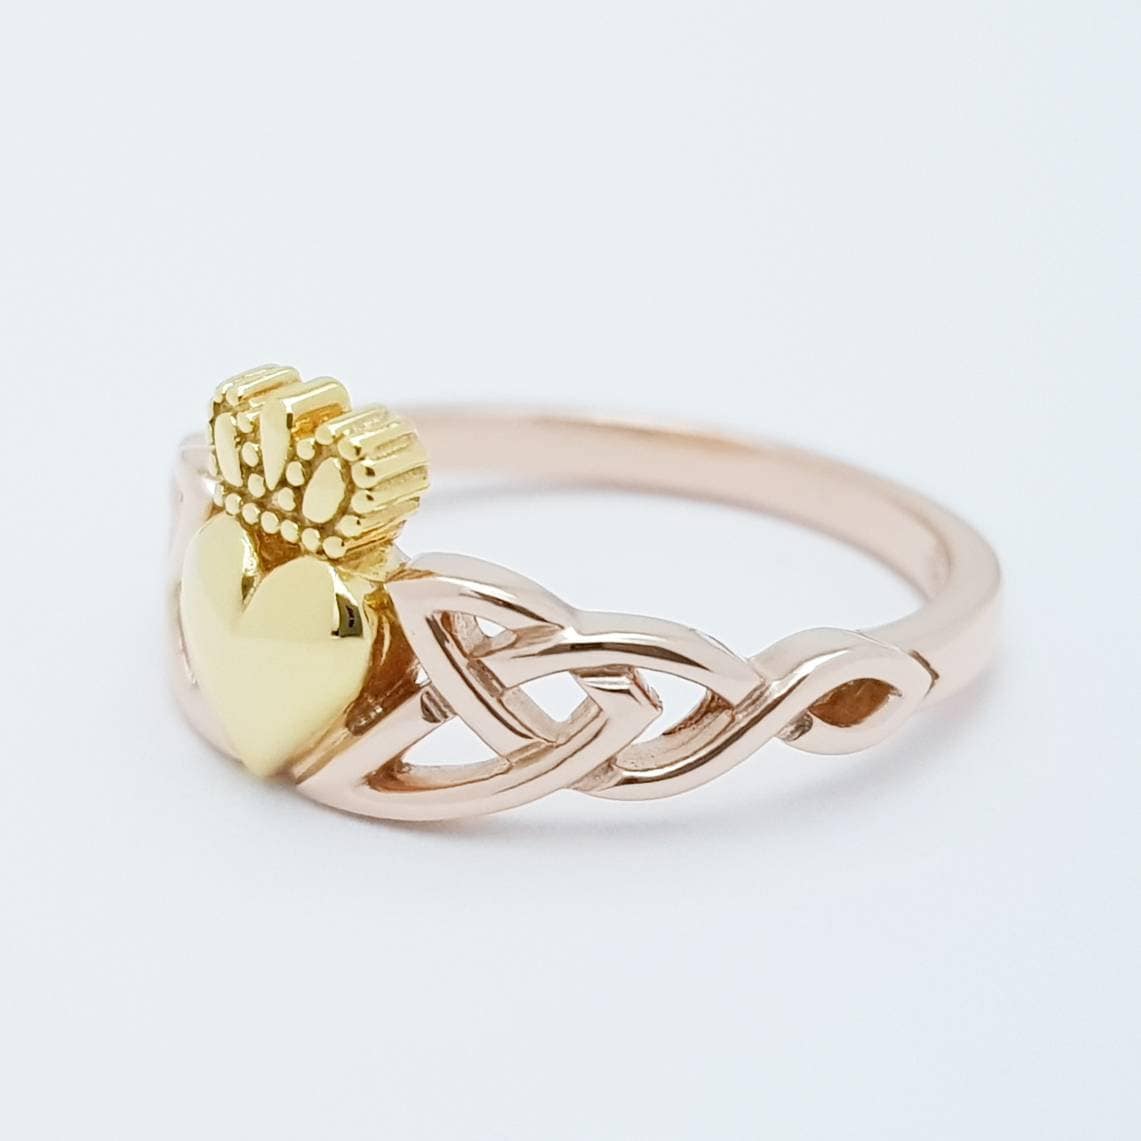 Sterling Silver Claddagh ring, rose and yellow gold celtic Knot Claddagh Ring, Irish celtic love ring